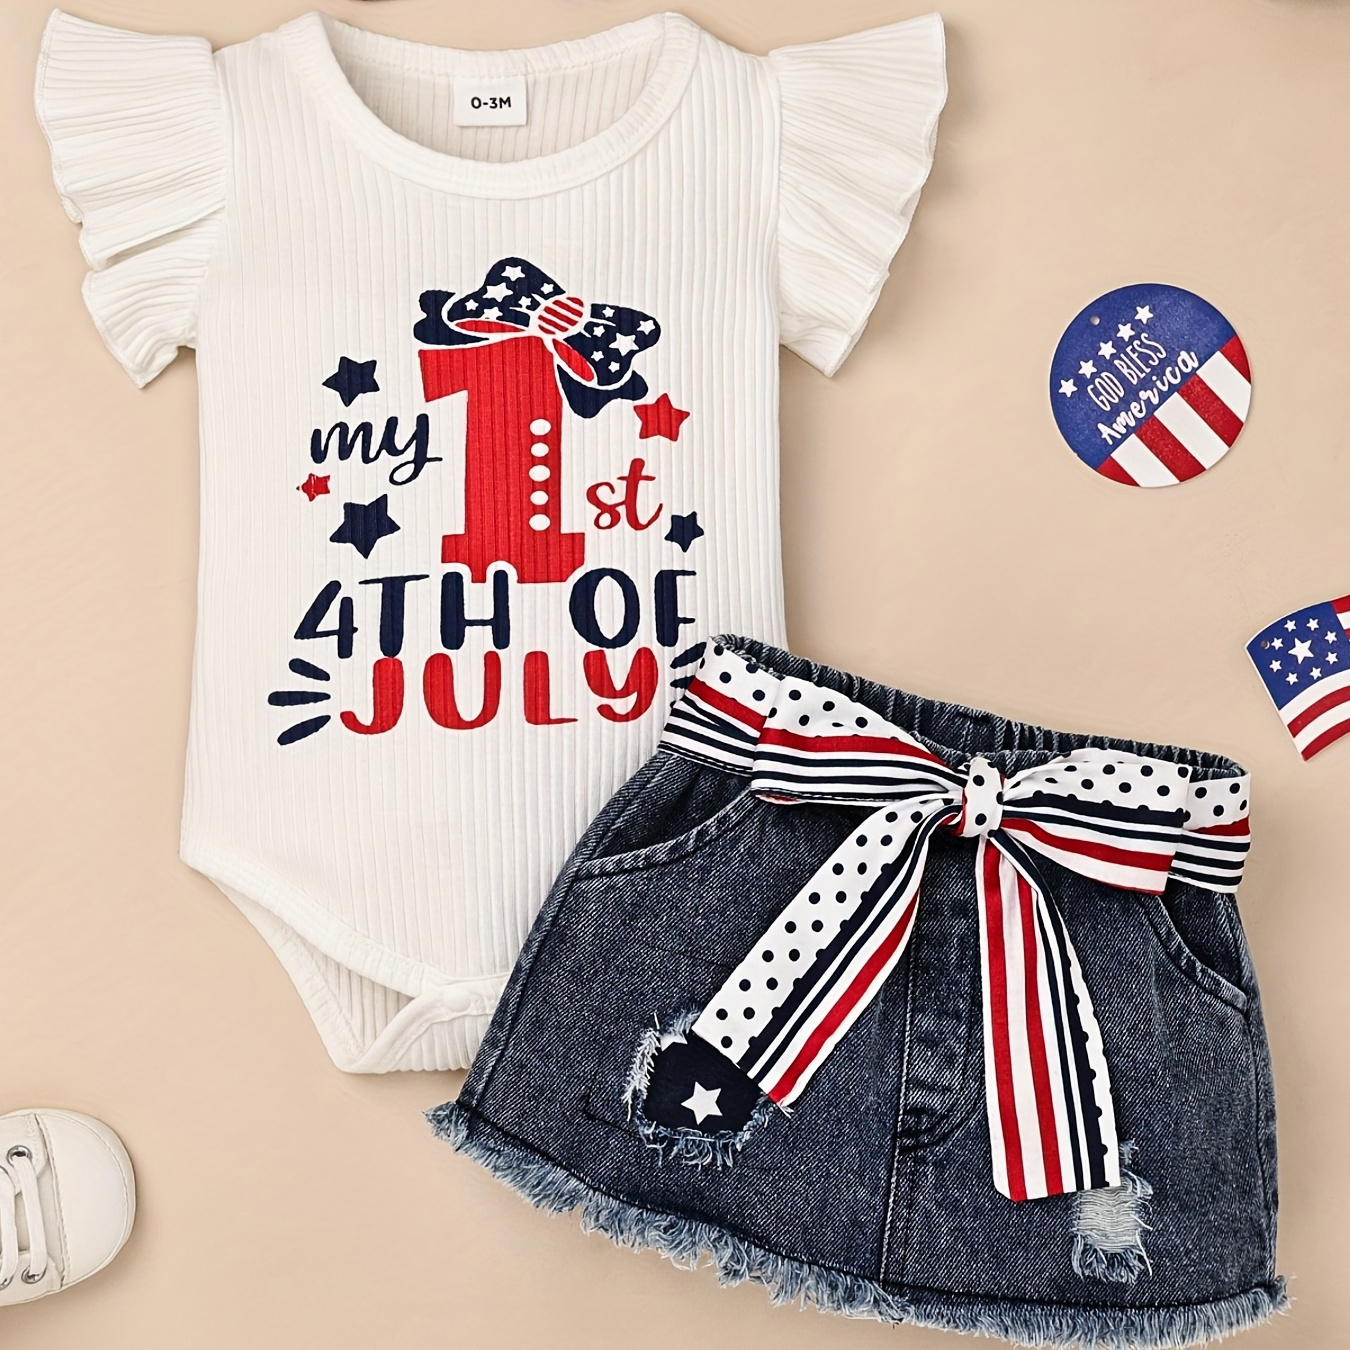 

"my 1st 4th Of July" Baby Girl Clothes, Newborn Baby Independence Day Outfits Infant Ruffle Romper + Short Jean Skirt With Waist Band+ Headband Set